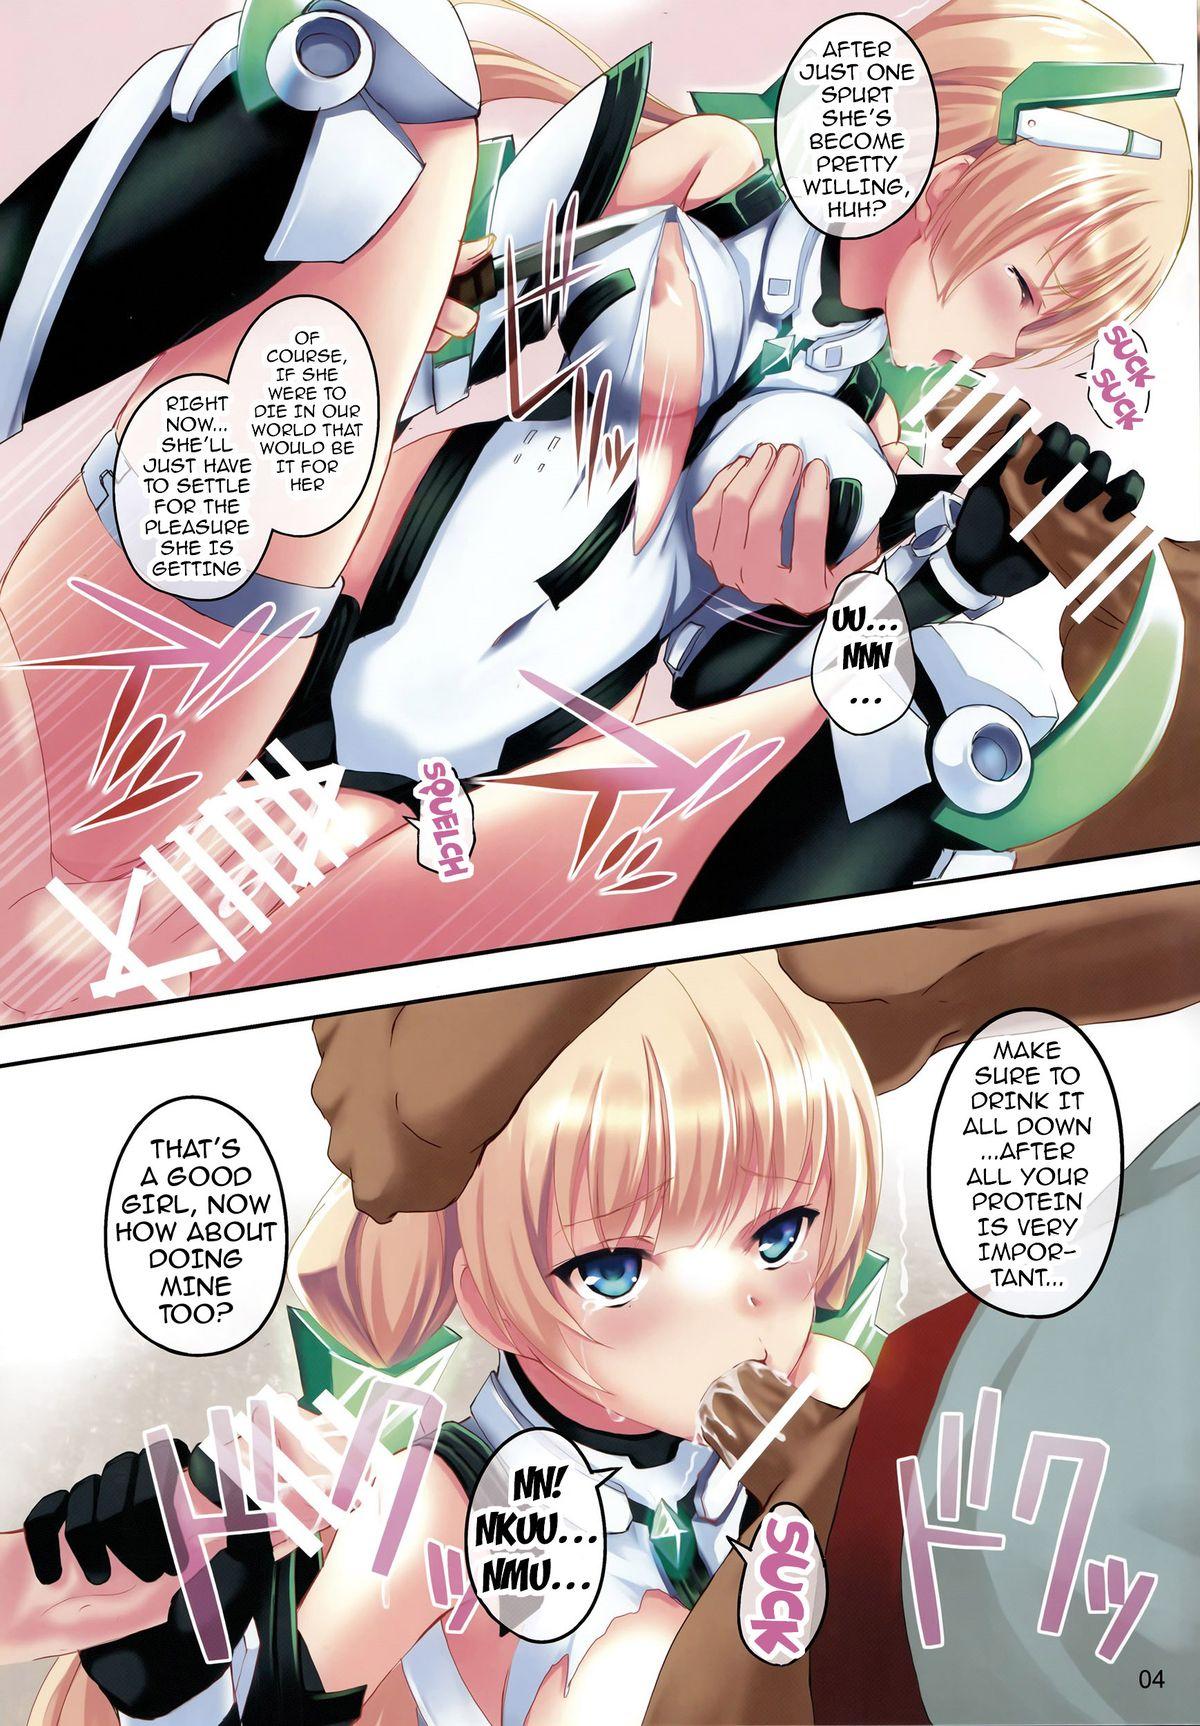 Riding Cock Fallen Angela - Expelled from paradise Asiansex - Page 4